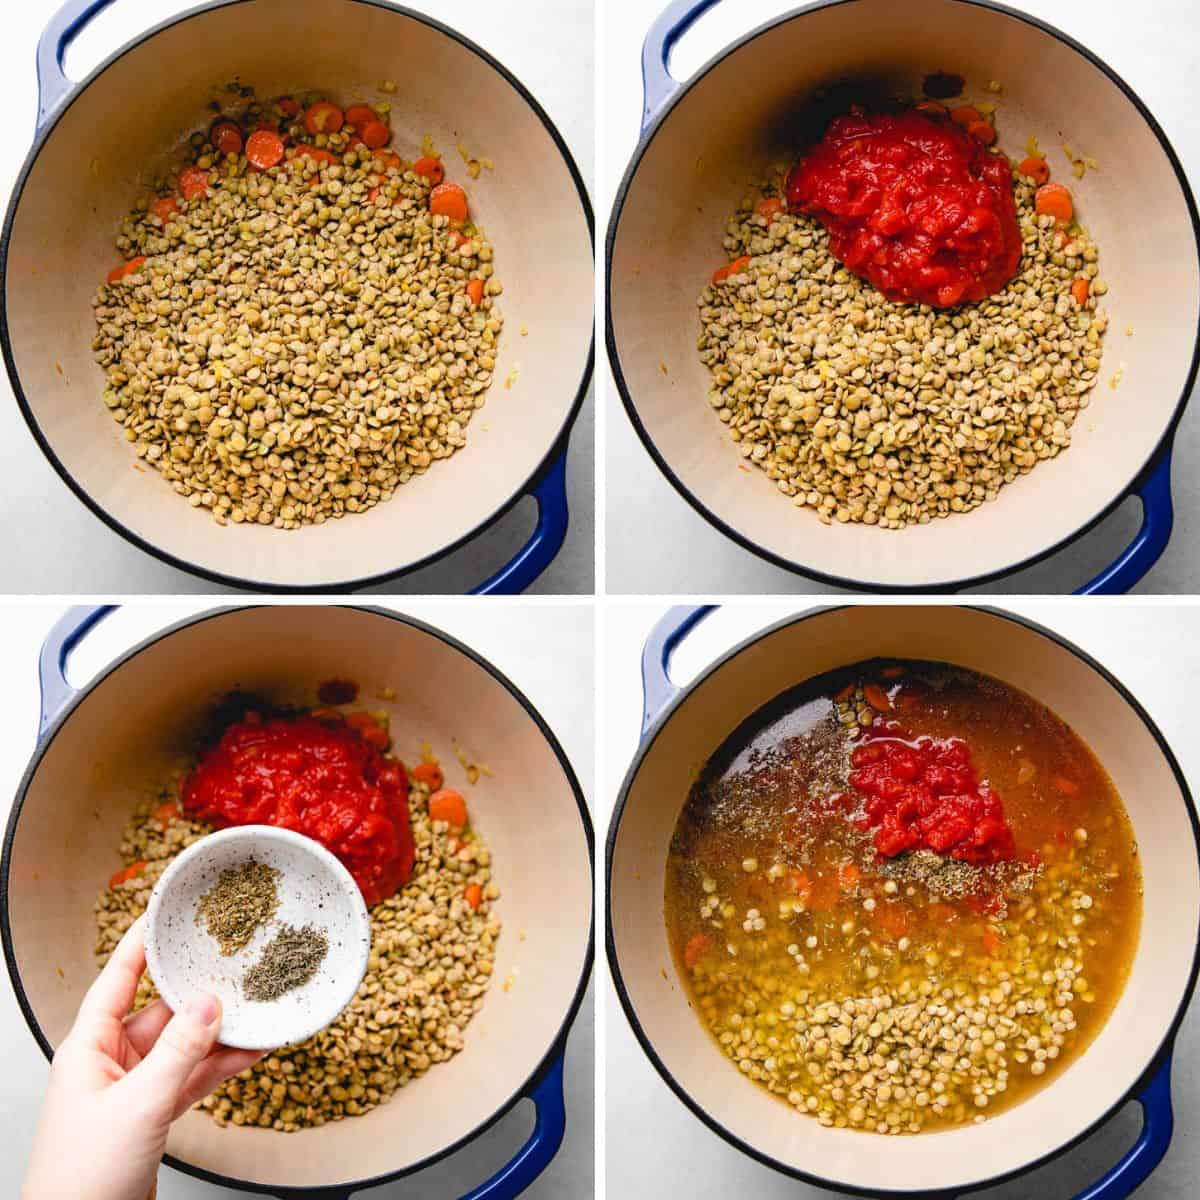 Process photos of adding lentils, crushed tomatoes, seasoning, and broth to the soup.